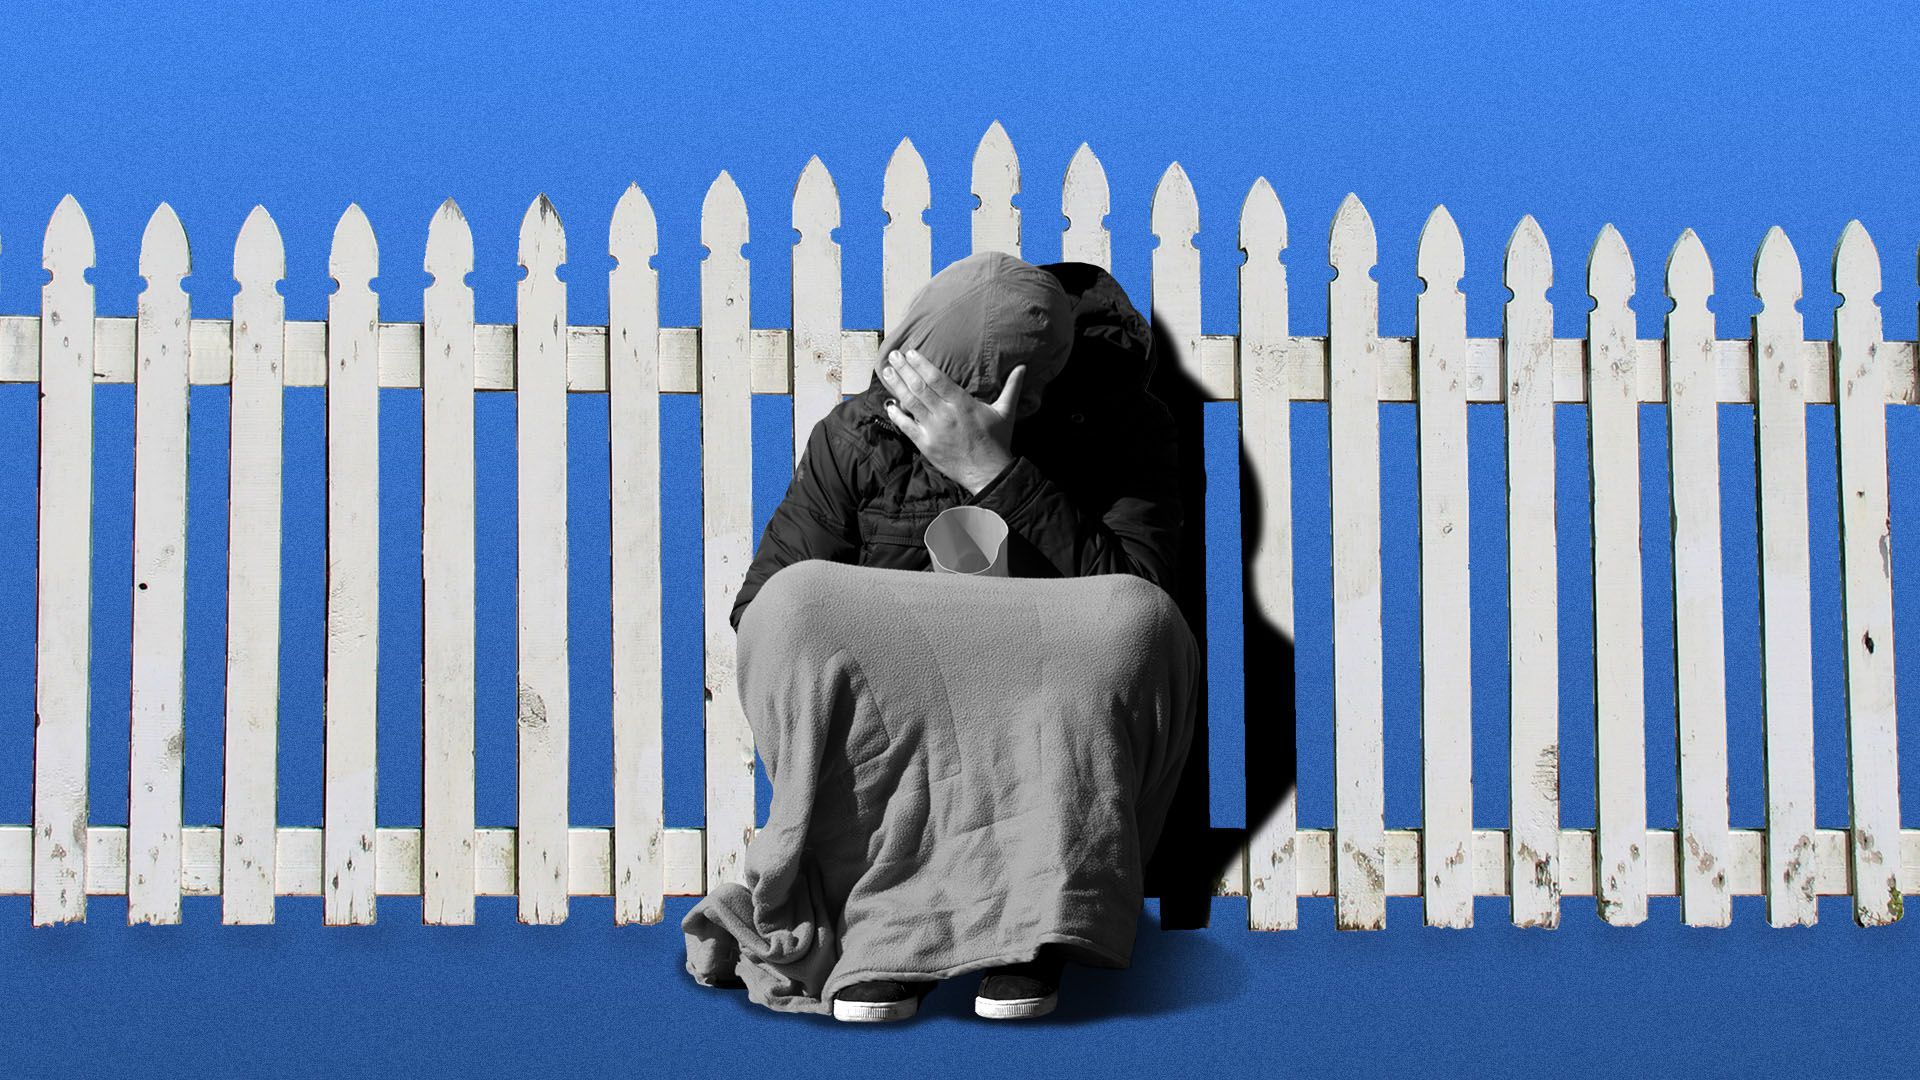 Illustration of a homeless person sitting in front of a white picket fence